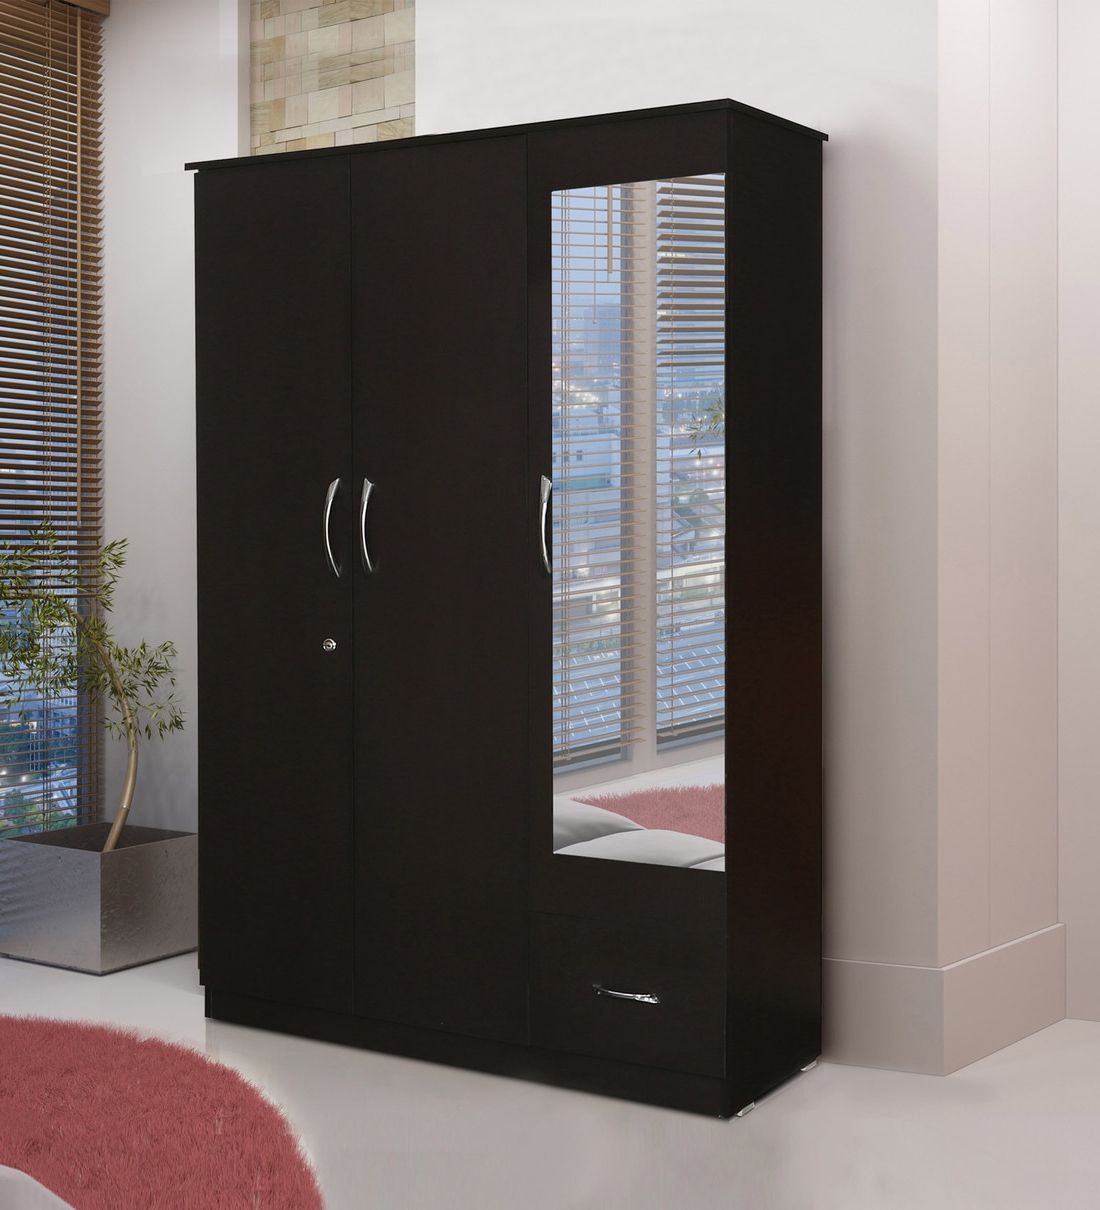 Buy Trois 3 Door Wardrobe In Wenge Finish With Mirror At 22% Off Fullstock | Pepperfry With Regard To 3 Doors Wardrobes With Mirror (Gallery 3 of 20)